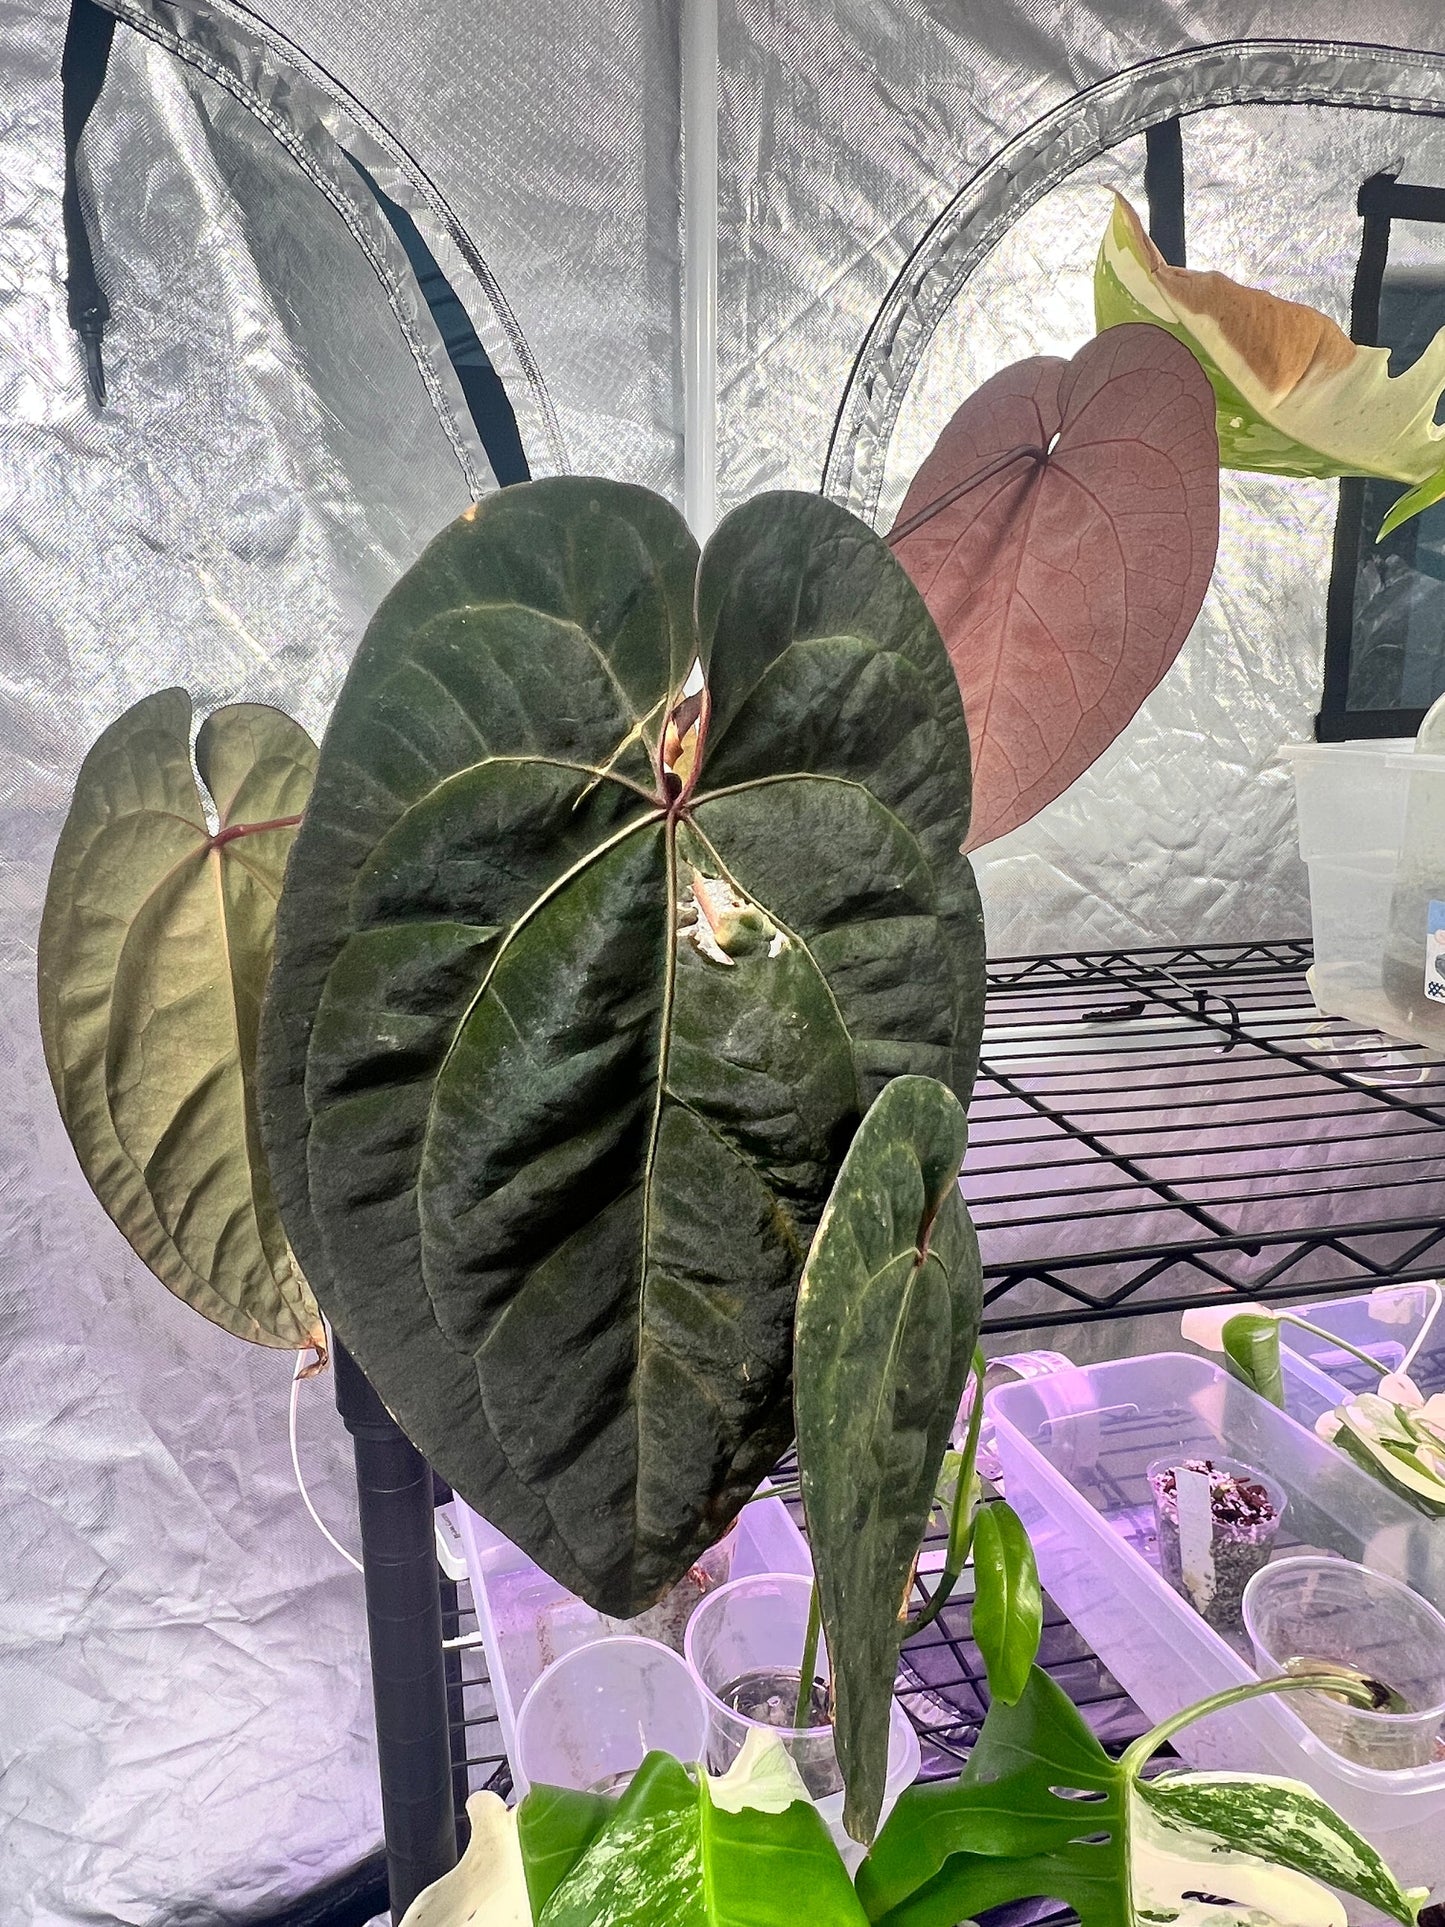 ANTHURIUM ACE OF SPADES node rooted with 1 activated bud. Free 1 golden flame cutting